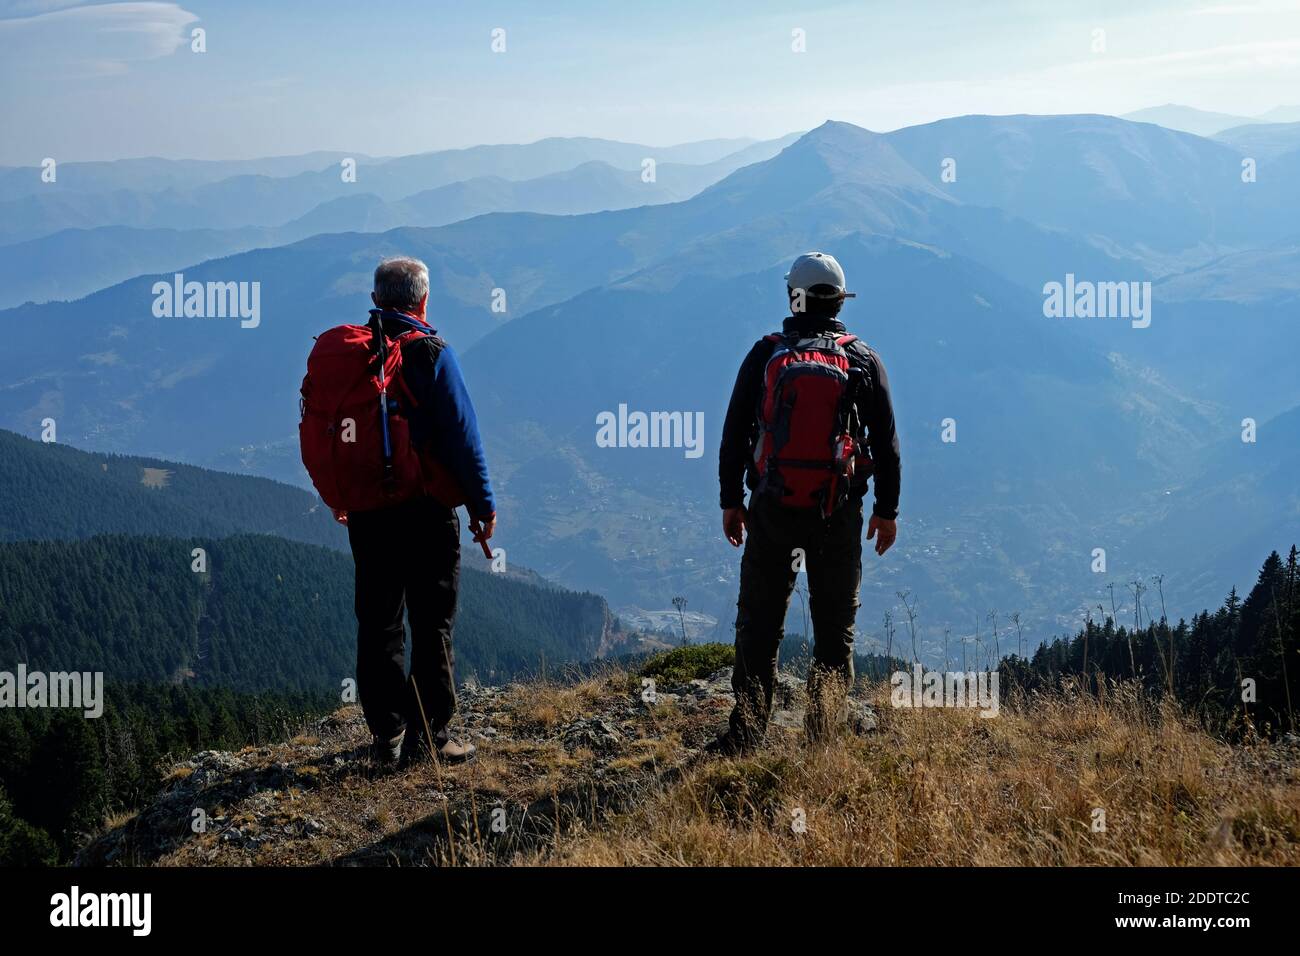 hikers walking in the plateaus of the eastern black sea region Stock Photo